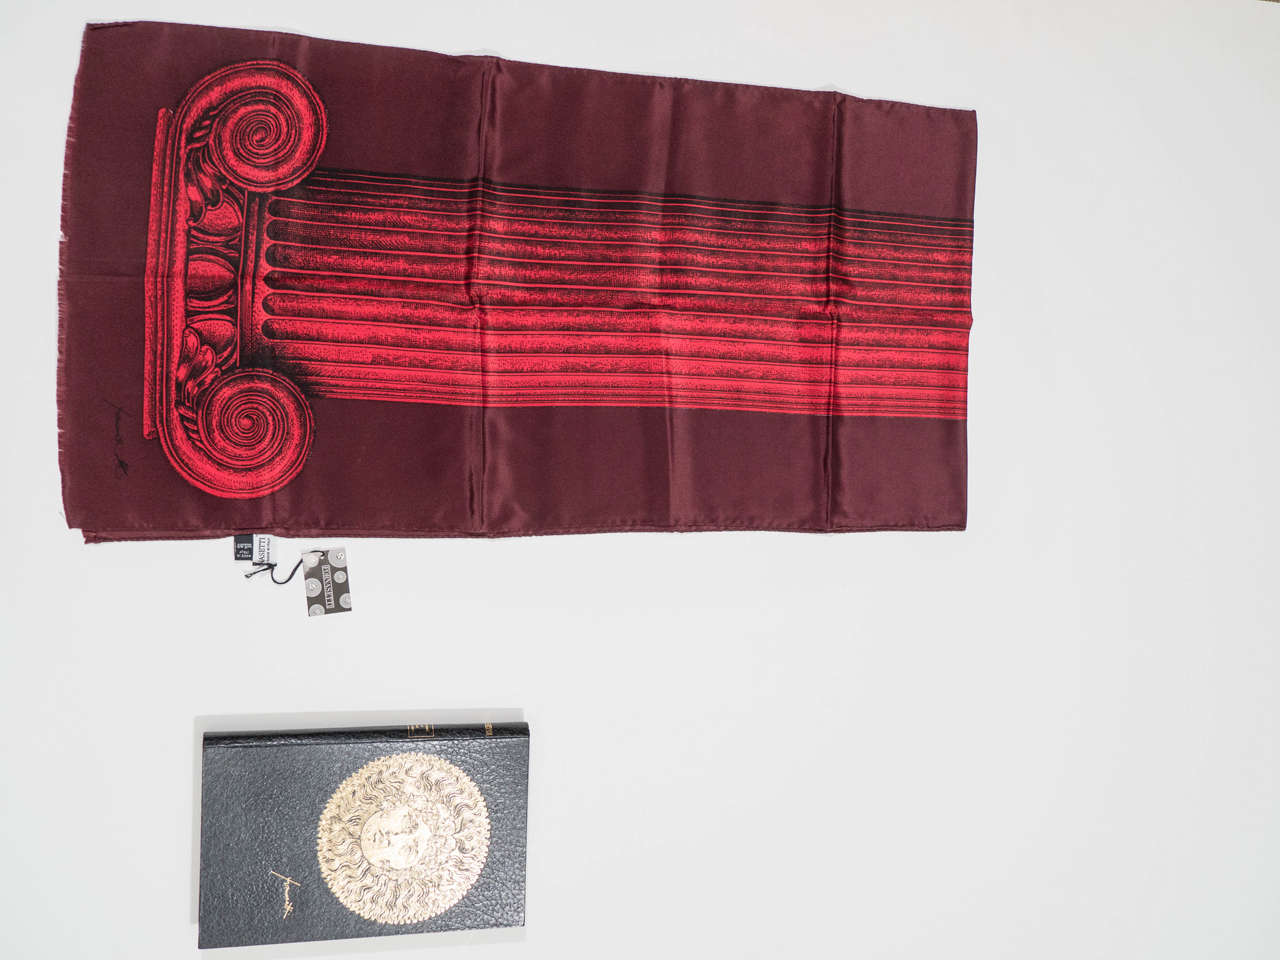 Piero Fornasetti Silk (with Wool Backing) Scarf with Column Motif in Red, Burgundy & Black, Italy c. 2000  With Original Box and Tags attached.